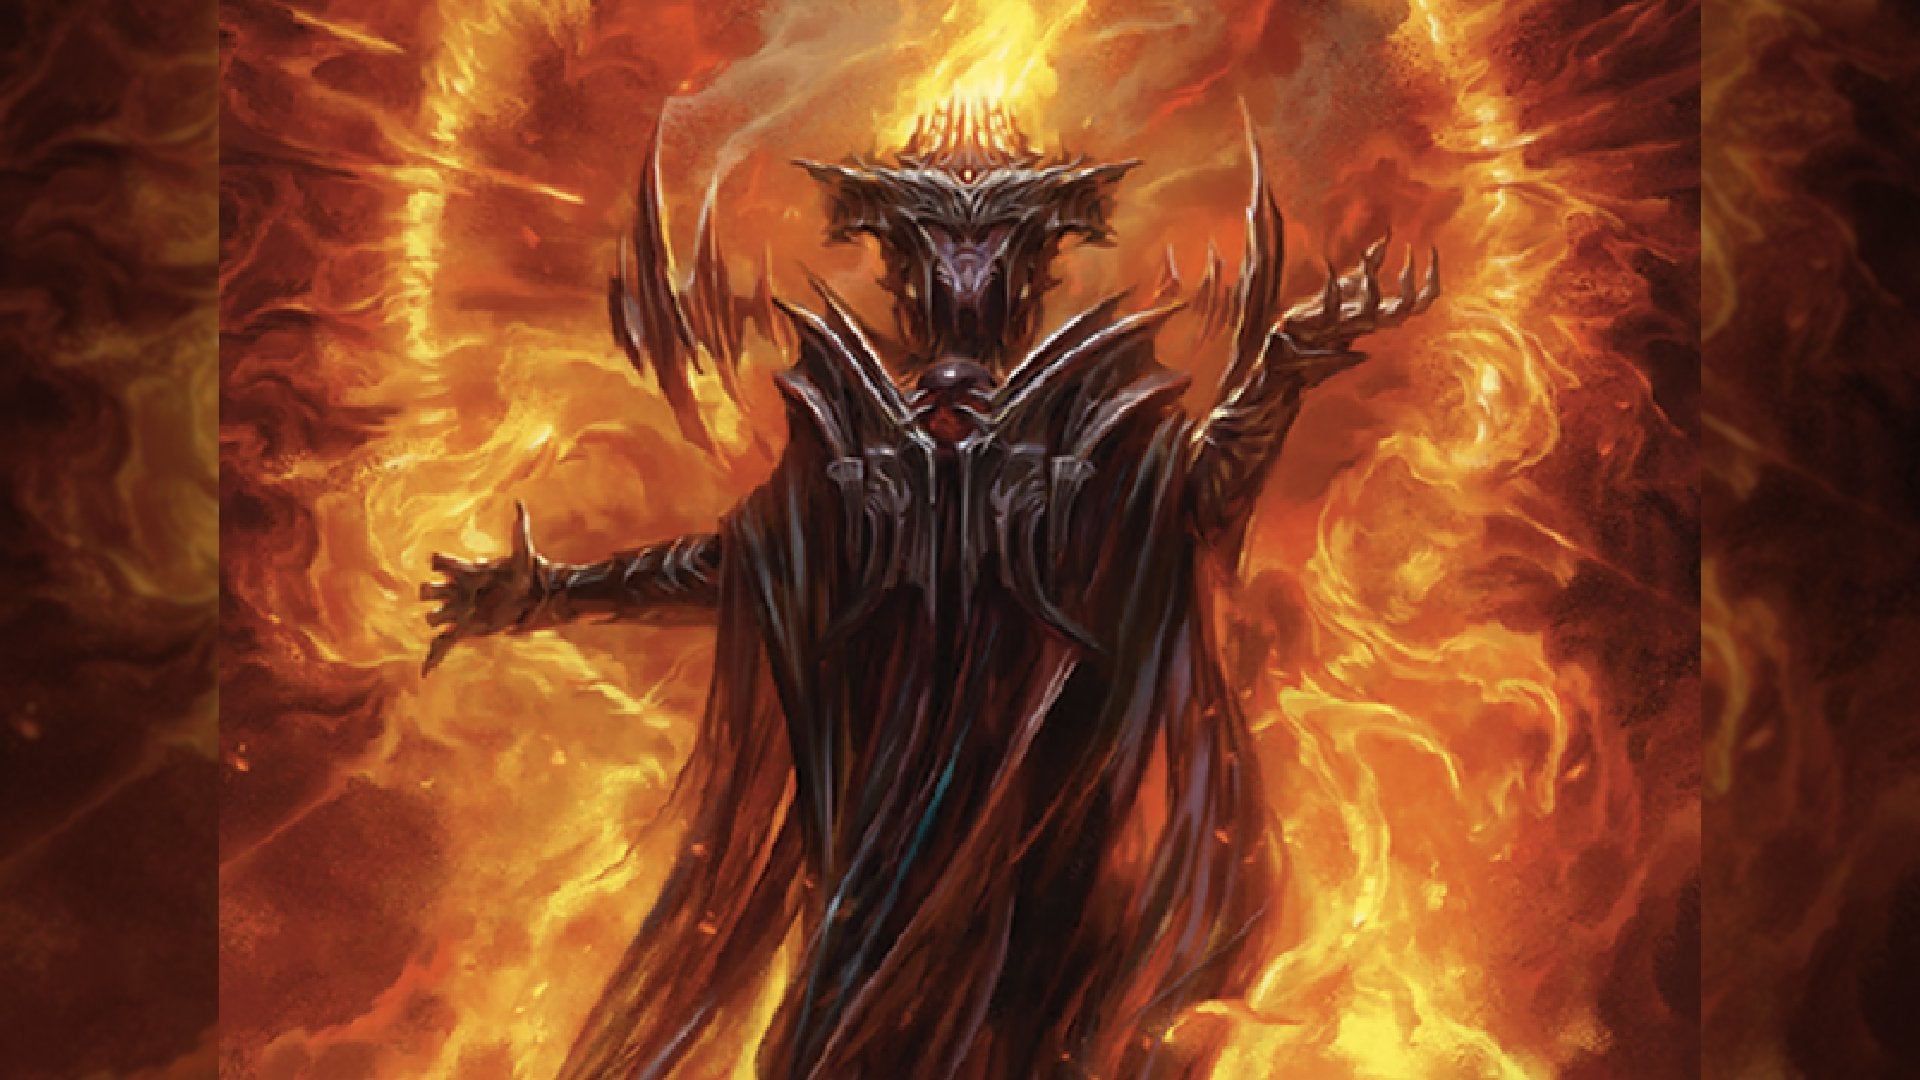 Card art from the Sauron, the Dark Lord MTG card that depicts Sauron from The Lord of the Rings in front of a ring of fire.